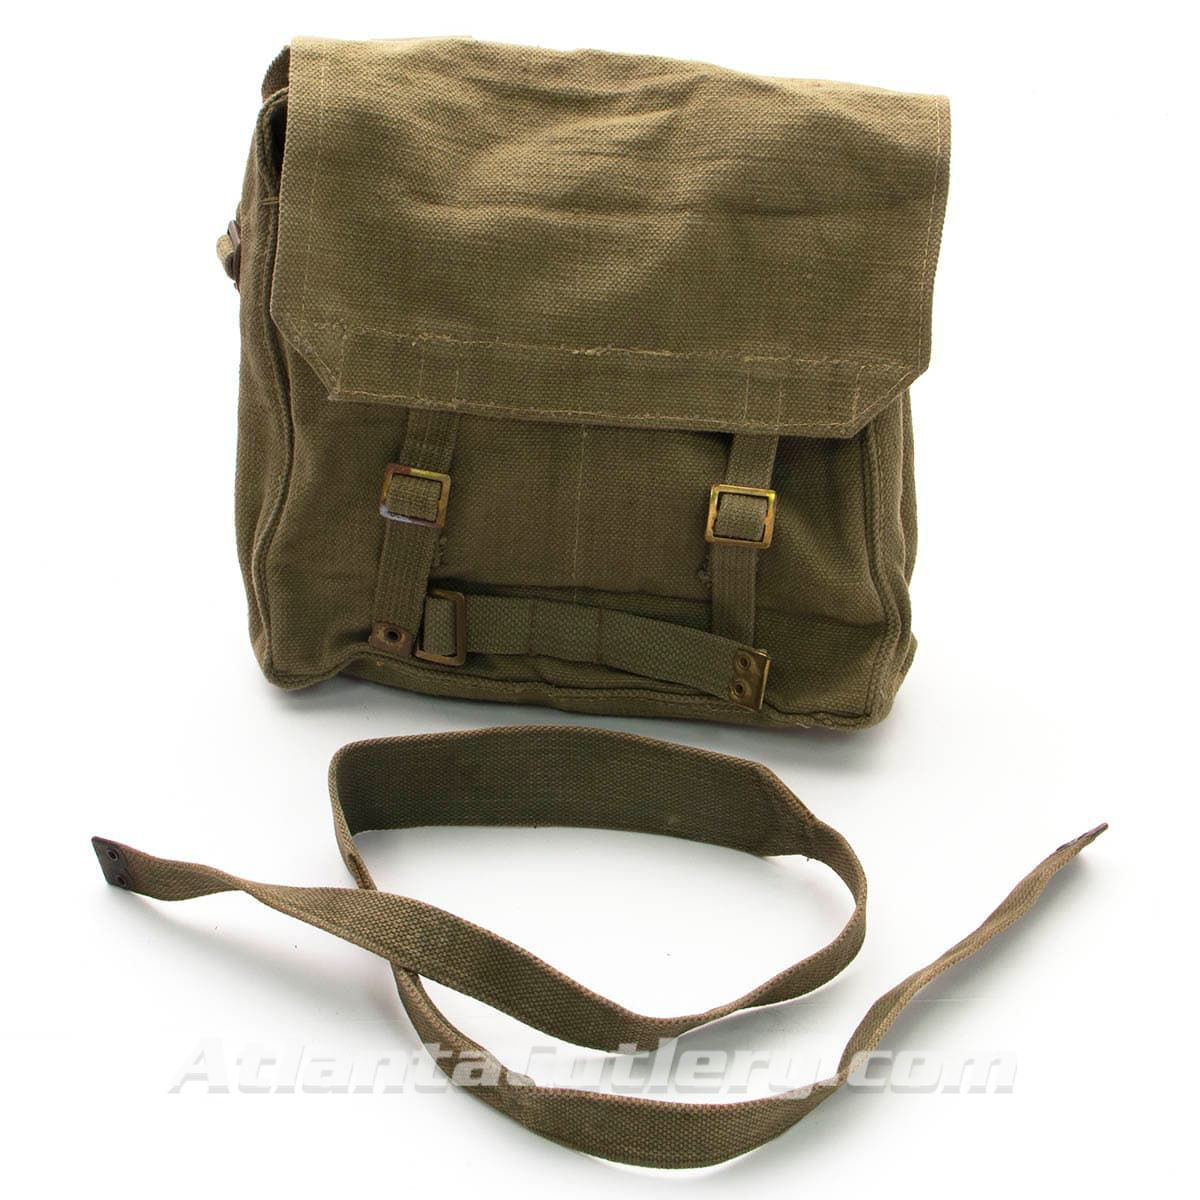 issued condition British military surplus canvas haversack, ideal for re-enactors or for use in the garden, field, or woods